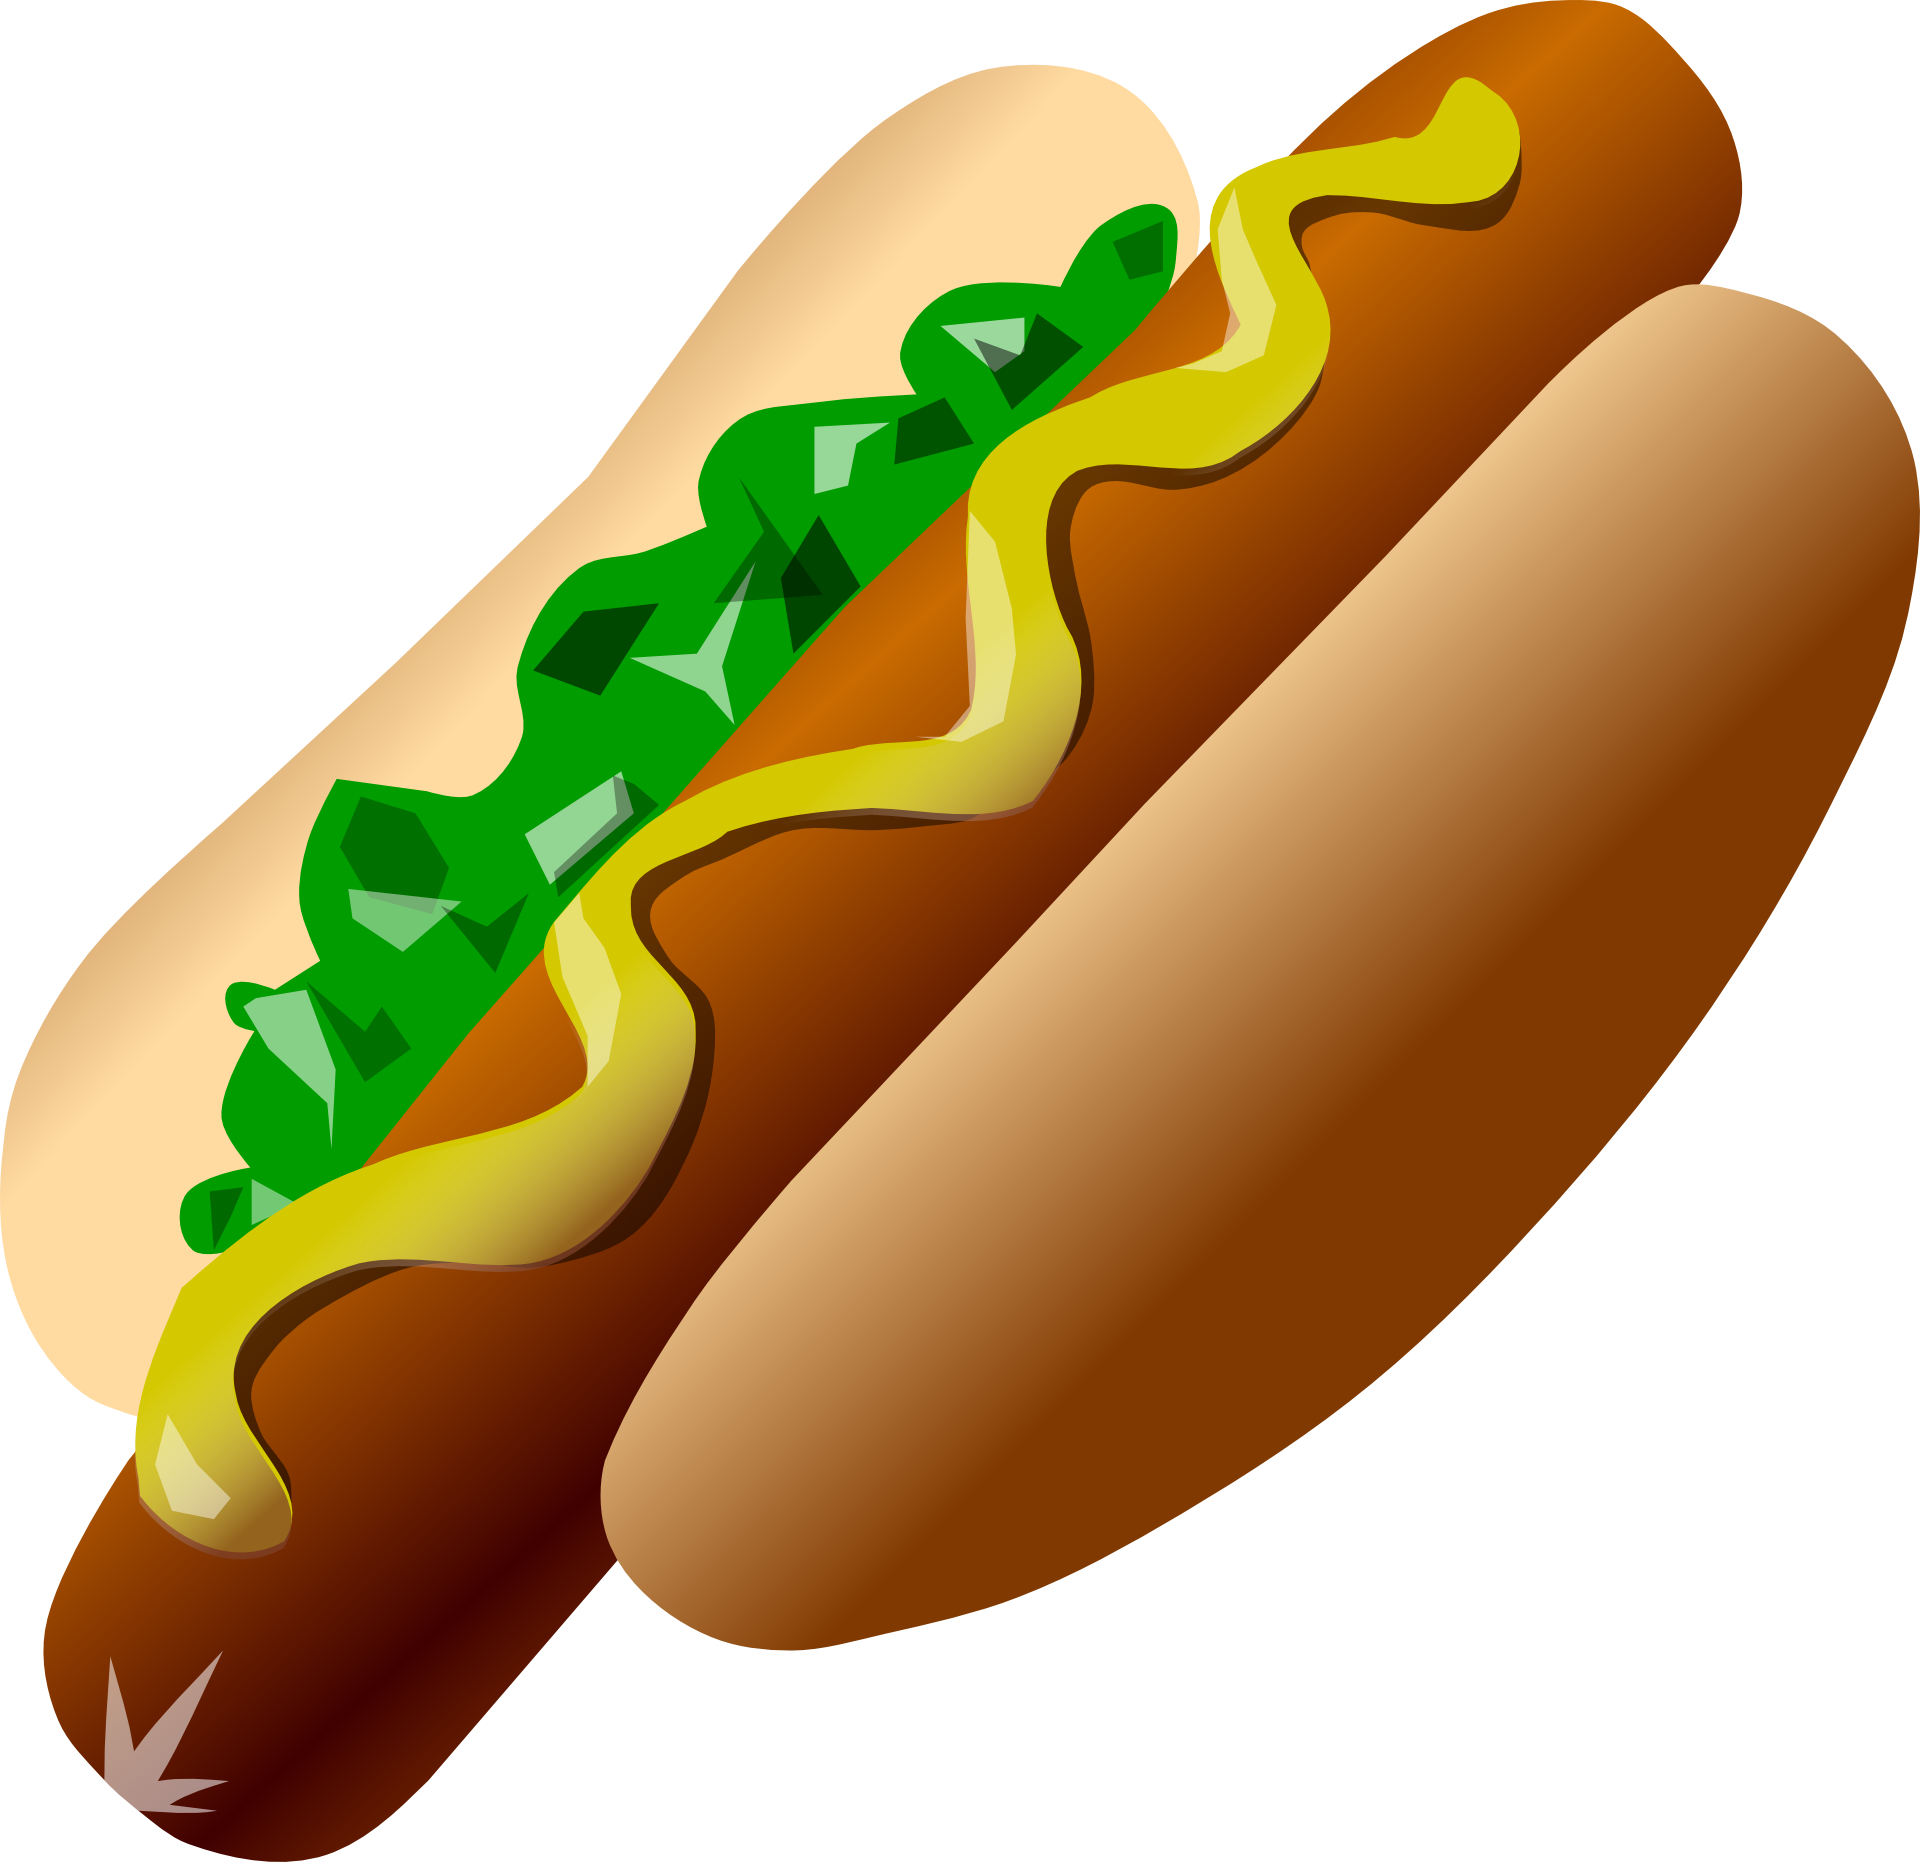 Delicious food,meat,ketchup,Hot Dog vector